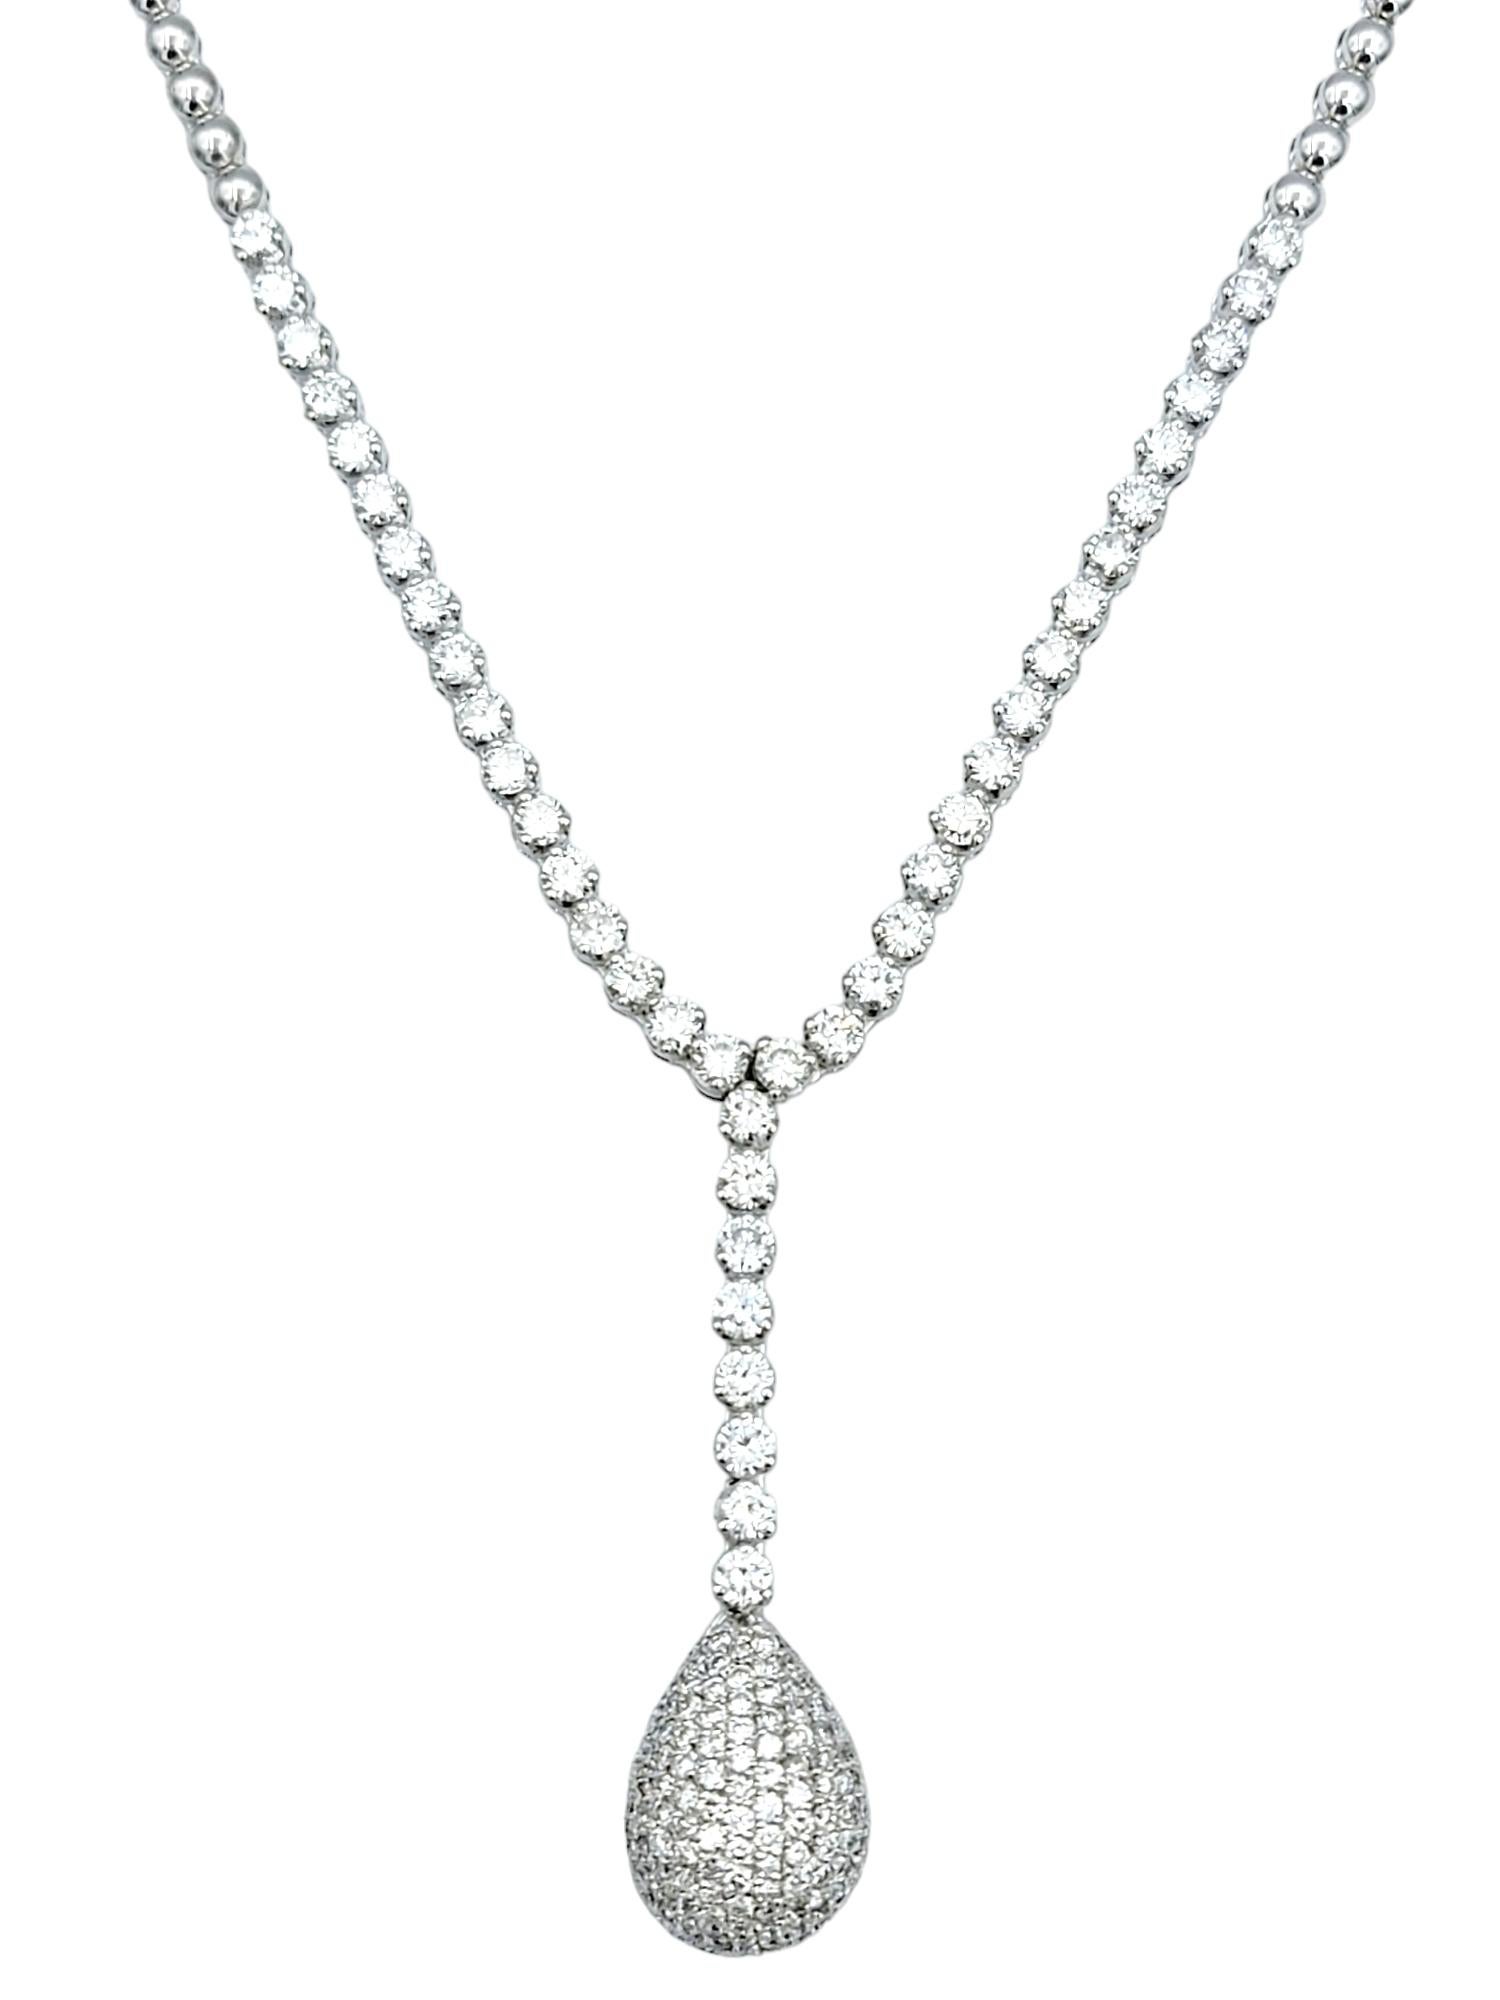 Elegance and sophistication converge in this breathtaking diamond lariat necklace, a dazzling adornment crafted with meticulous precision in 18 karat white gold. The focal point of the piece is the teardrop pendant, generously encrusted with pave